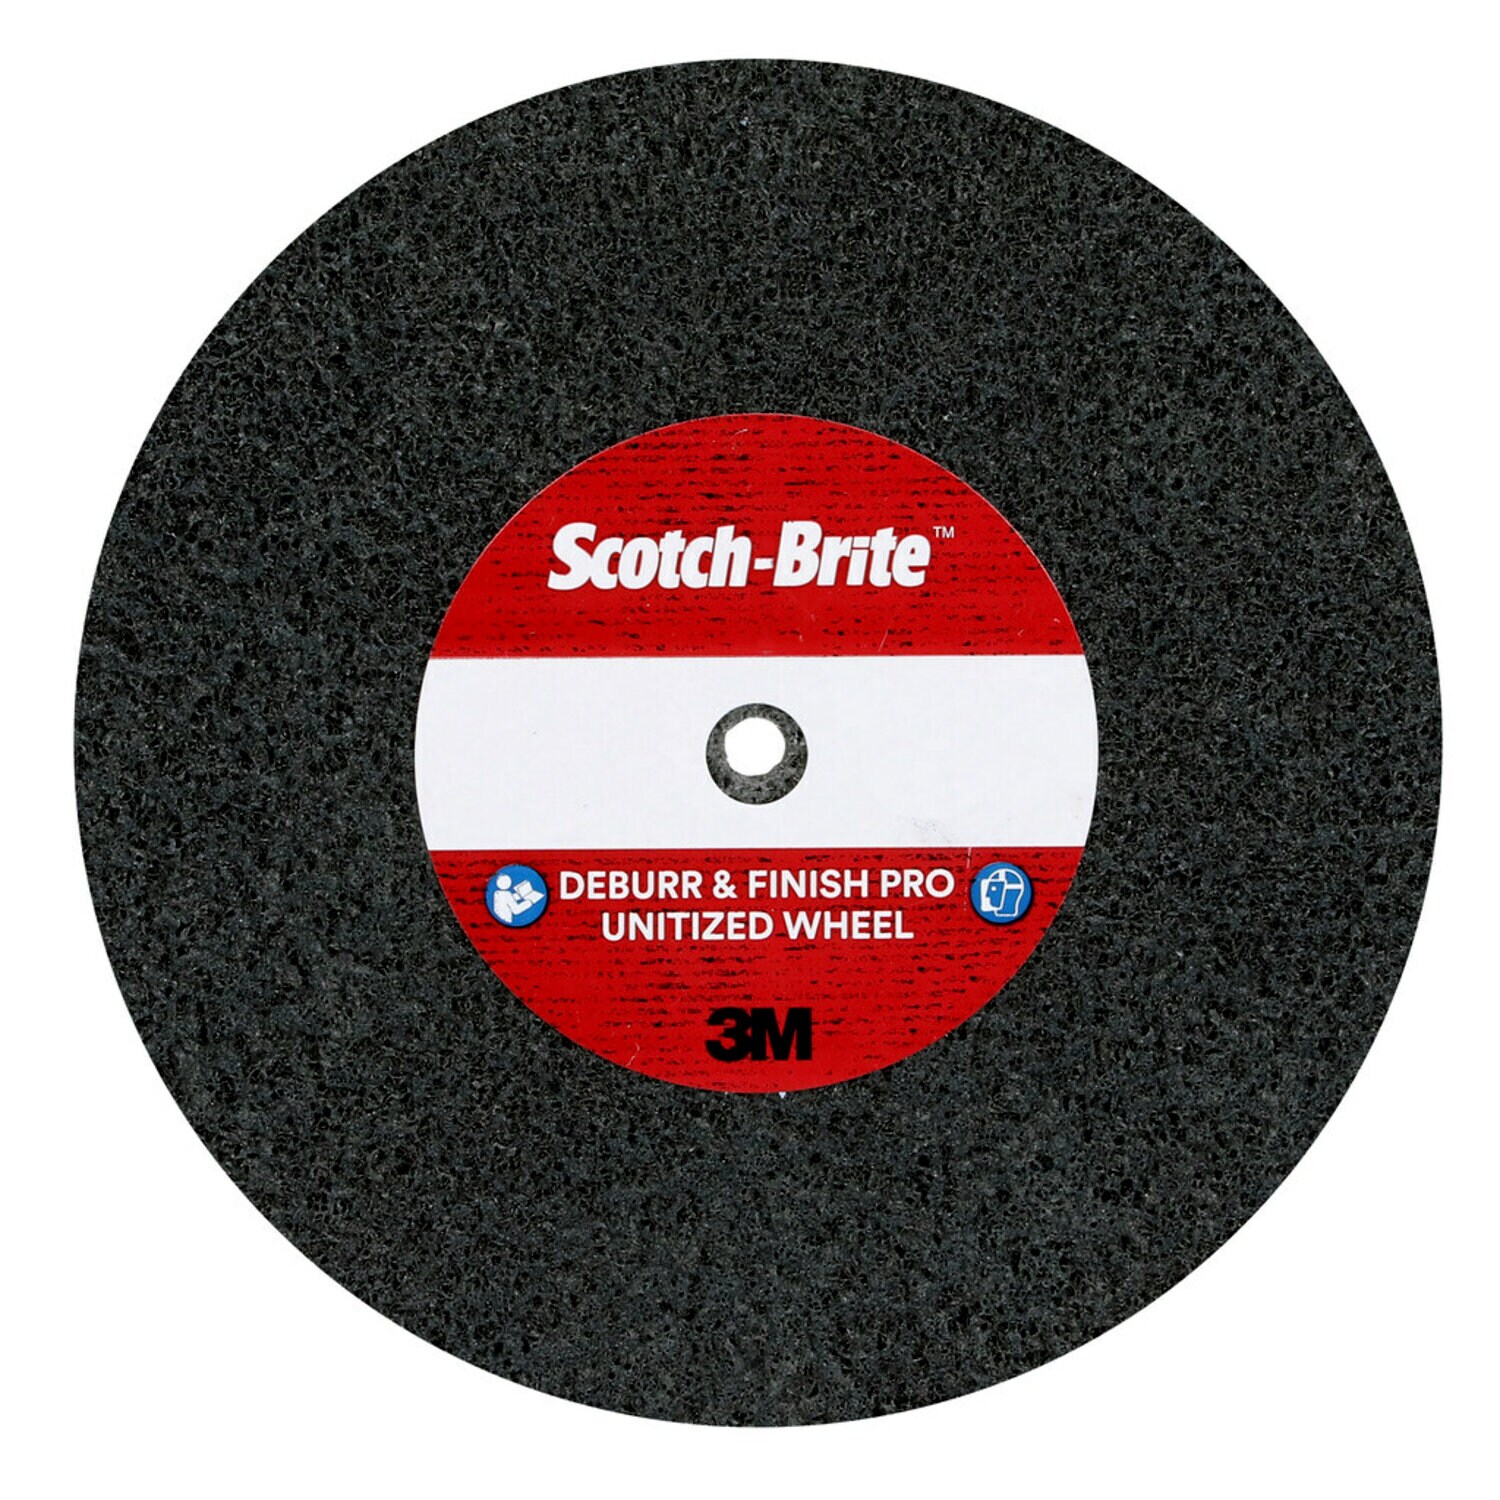 00638060051634, Scotch-Brite Deburr & Finish Pro Unitized Wheel, DP-UW, 2S  Fine, 3 in x 1/2 in x 1/4 in, 20 ea/Case, Aircraft products, deburring--finishing-wheels